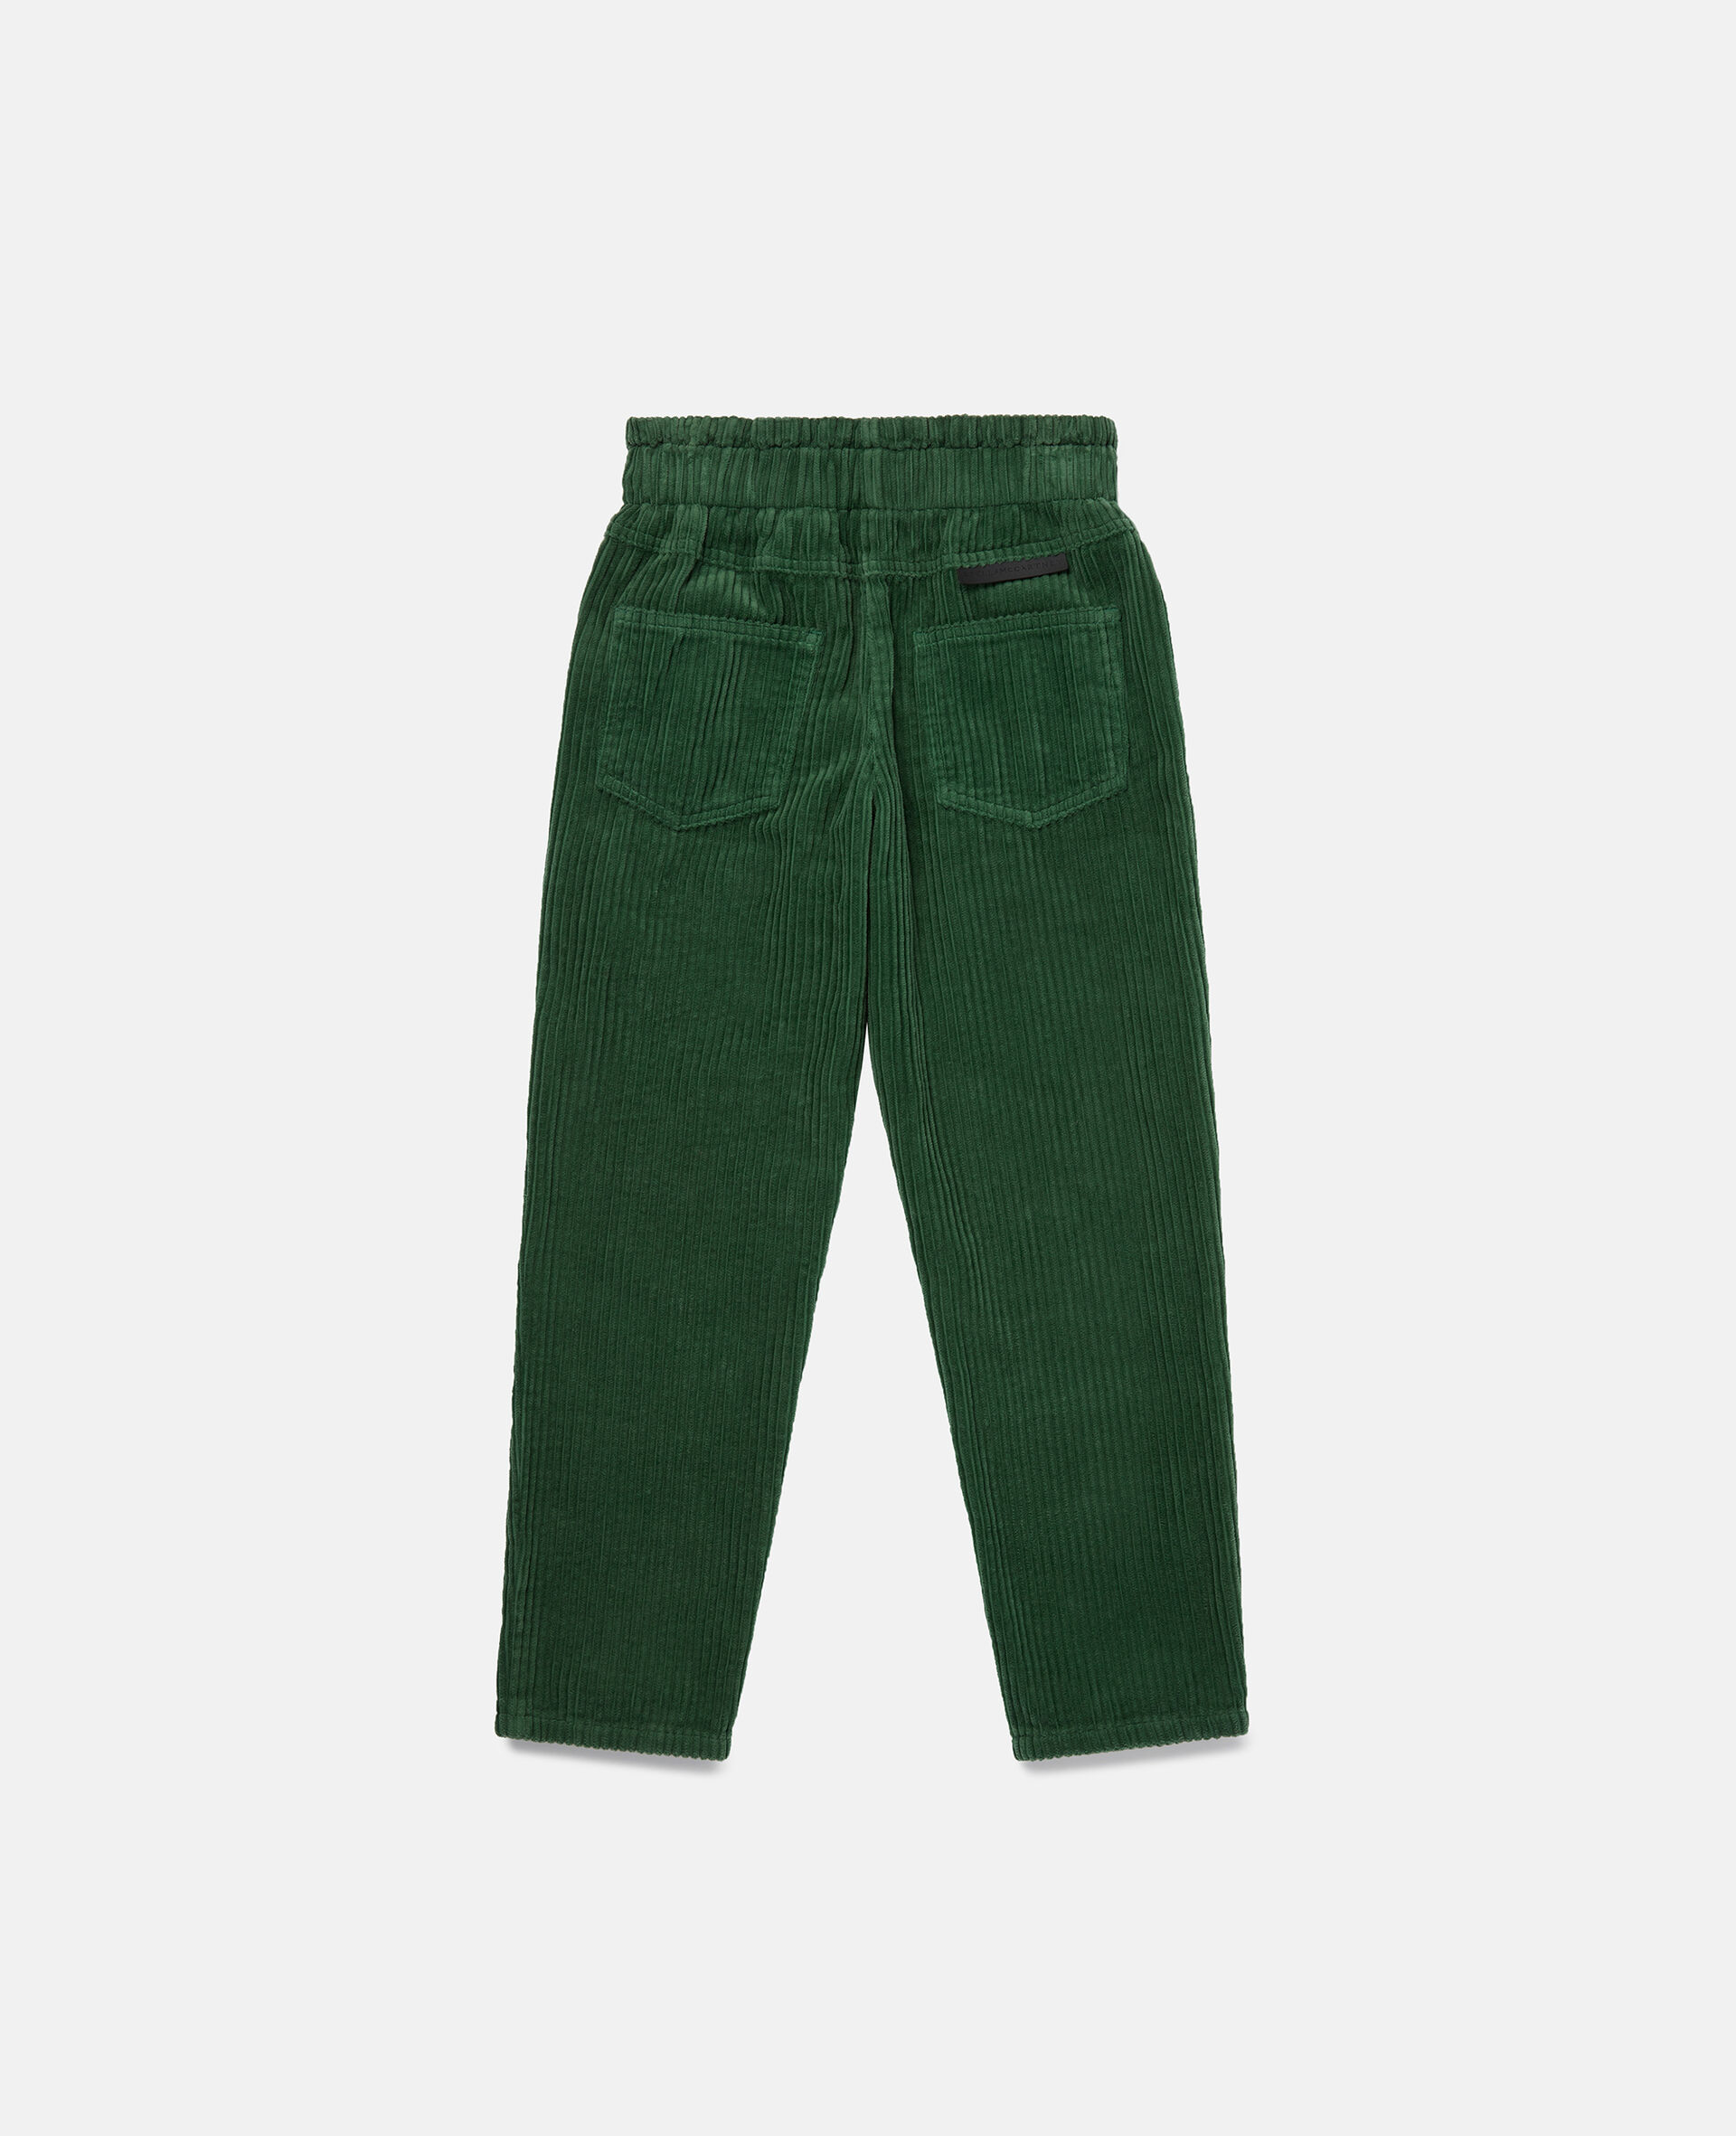 Corduroy Paperbag Trousers-Green-large image number 2